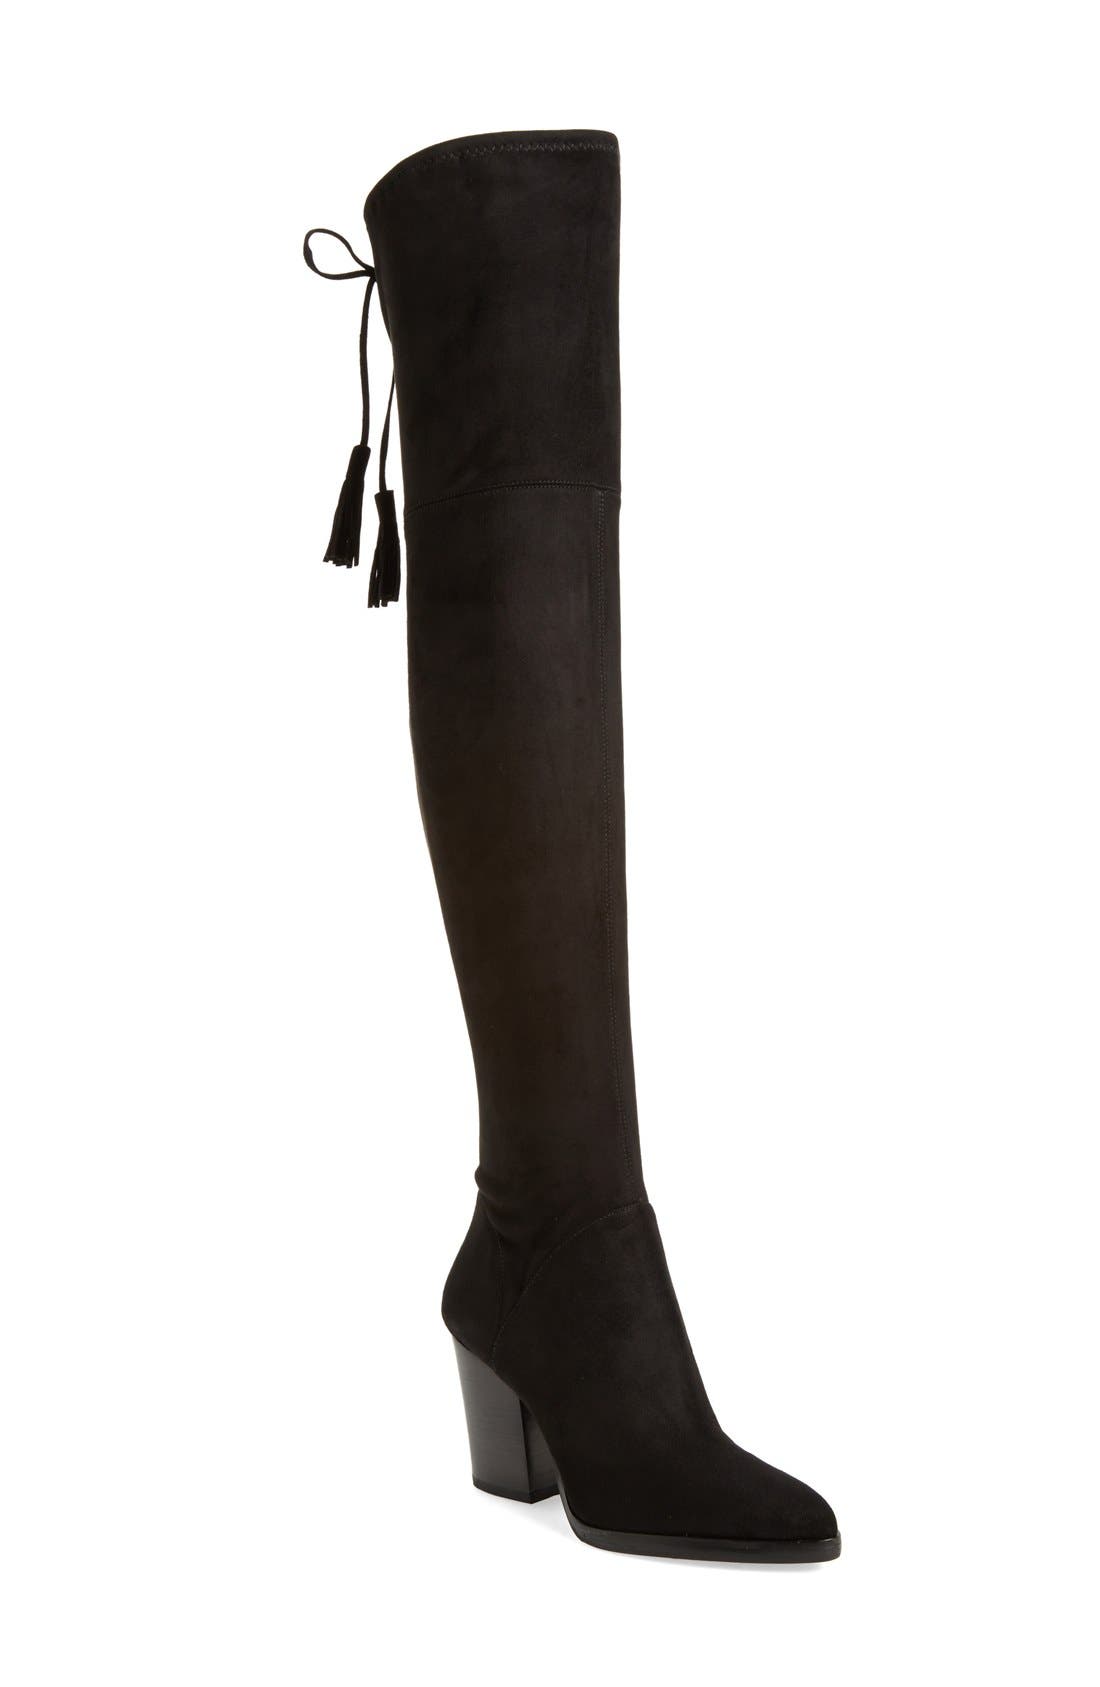 marc fisher over the knee boots taupe